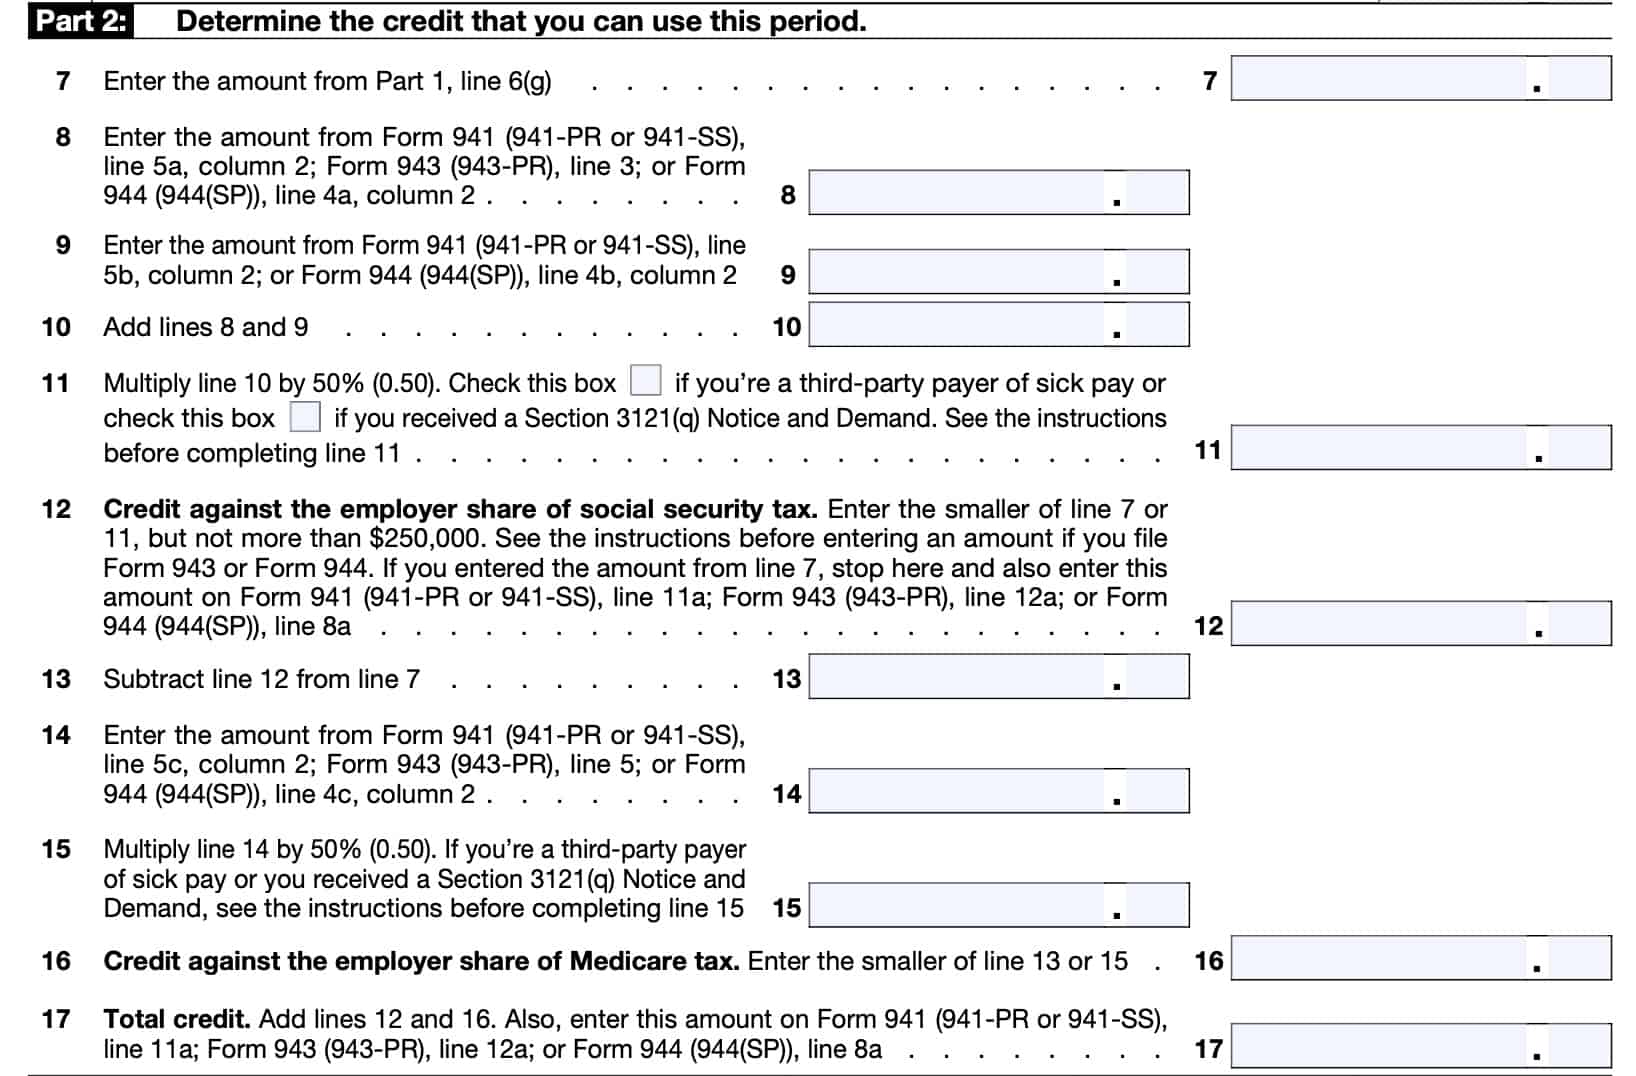 irs form 8974 part 2: determine the credit that you can use this period